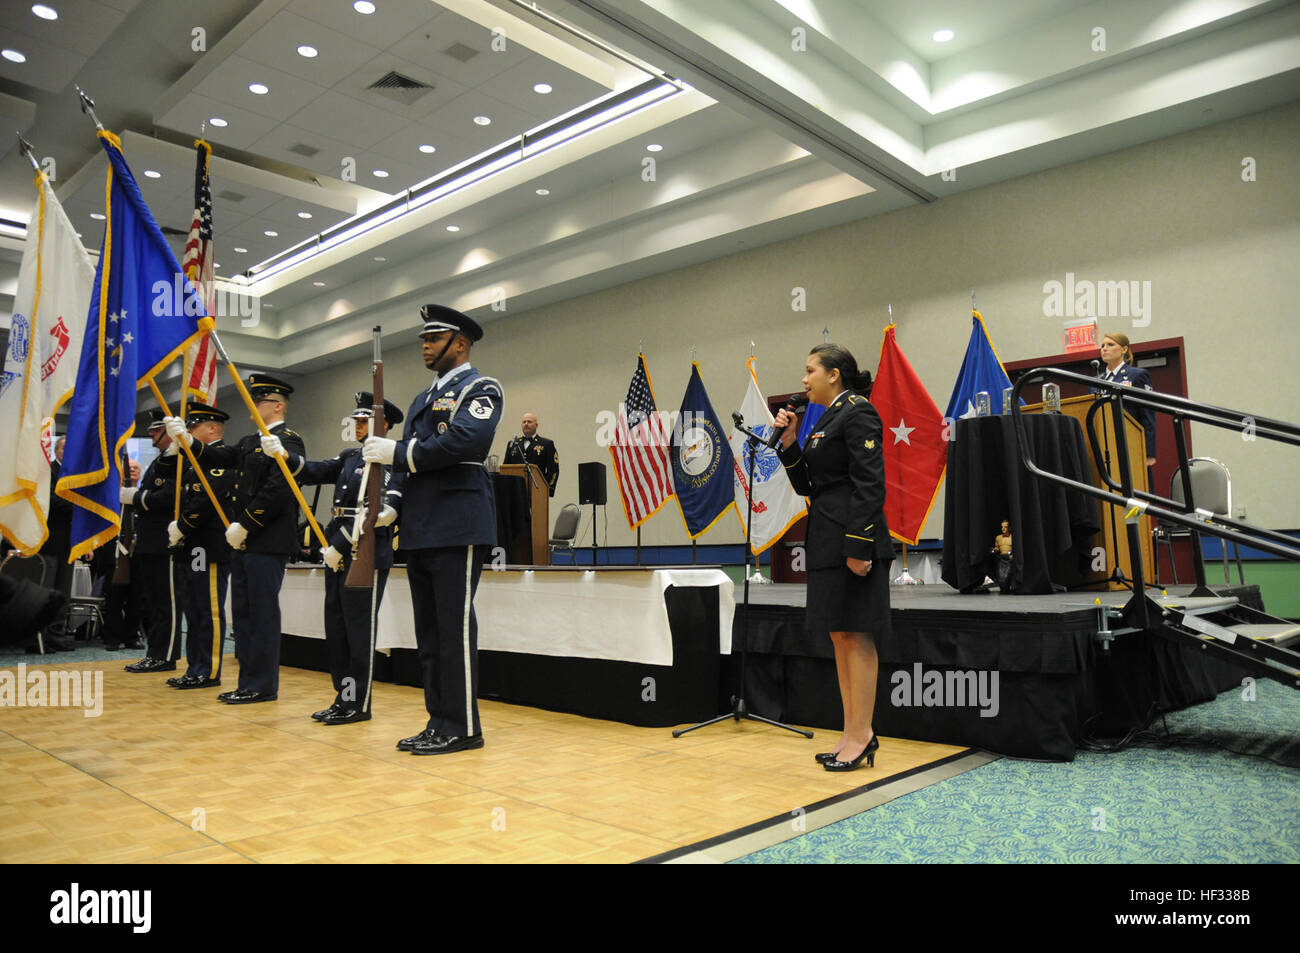 Kentucky Army National Guard Spc. Stacy Pesut, a human resources specialist assigned to Headquarters and Headquarters Detachment, 103rd Chemical Battalion, sings the national anthem, while the joint-service Kentucky National Guard color guard presents the colors at the 2015 Outstanding Airman and Soldier of the Year banquet, March 14, at the Kentucky Fair and Exposition Center in Louisville, Kentucky. The annual awards dinner honors Kentucky's finest Airmen and Soldiers who are recognized by their peers for dedicating themselves to the welfare and security of our nation. (Photo by Sgt. 1st Cla Stock Photo